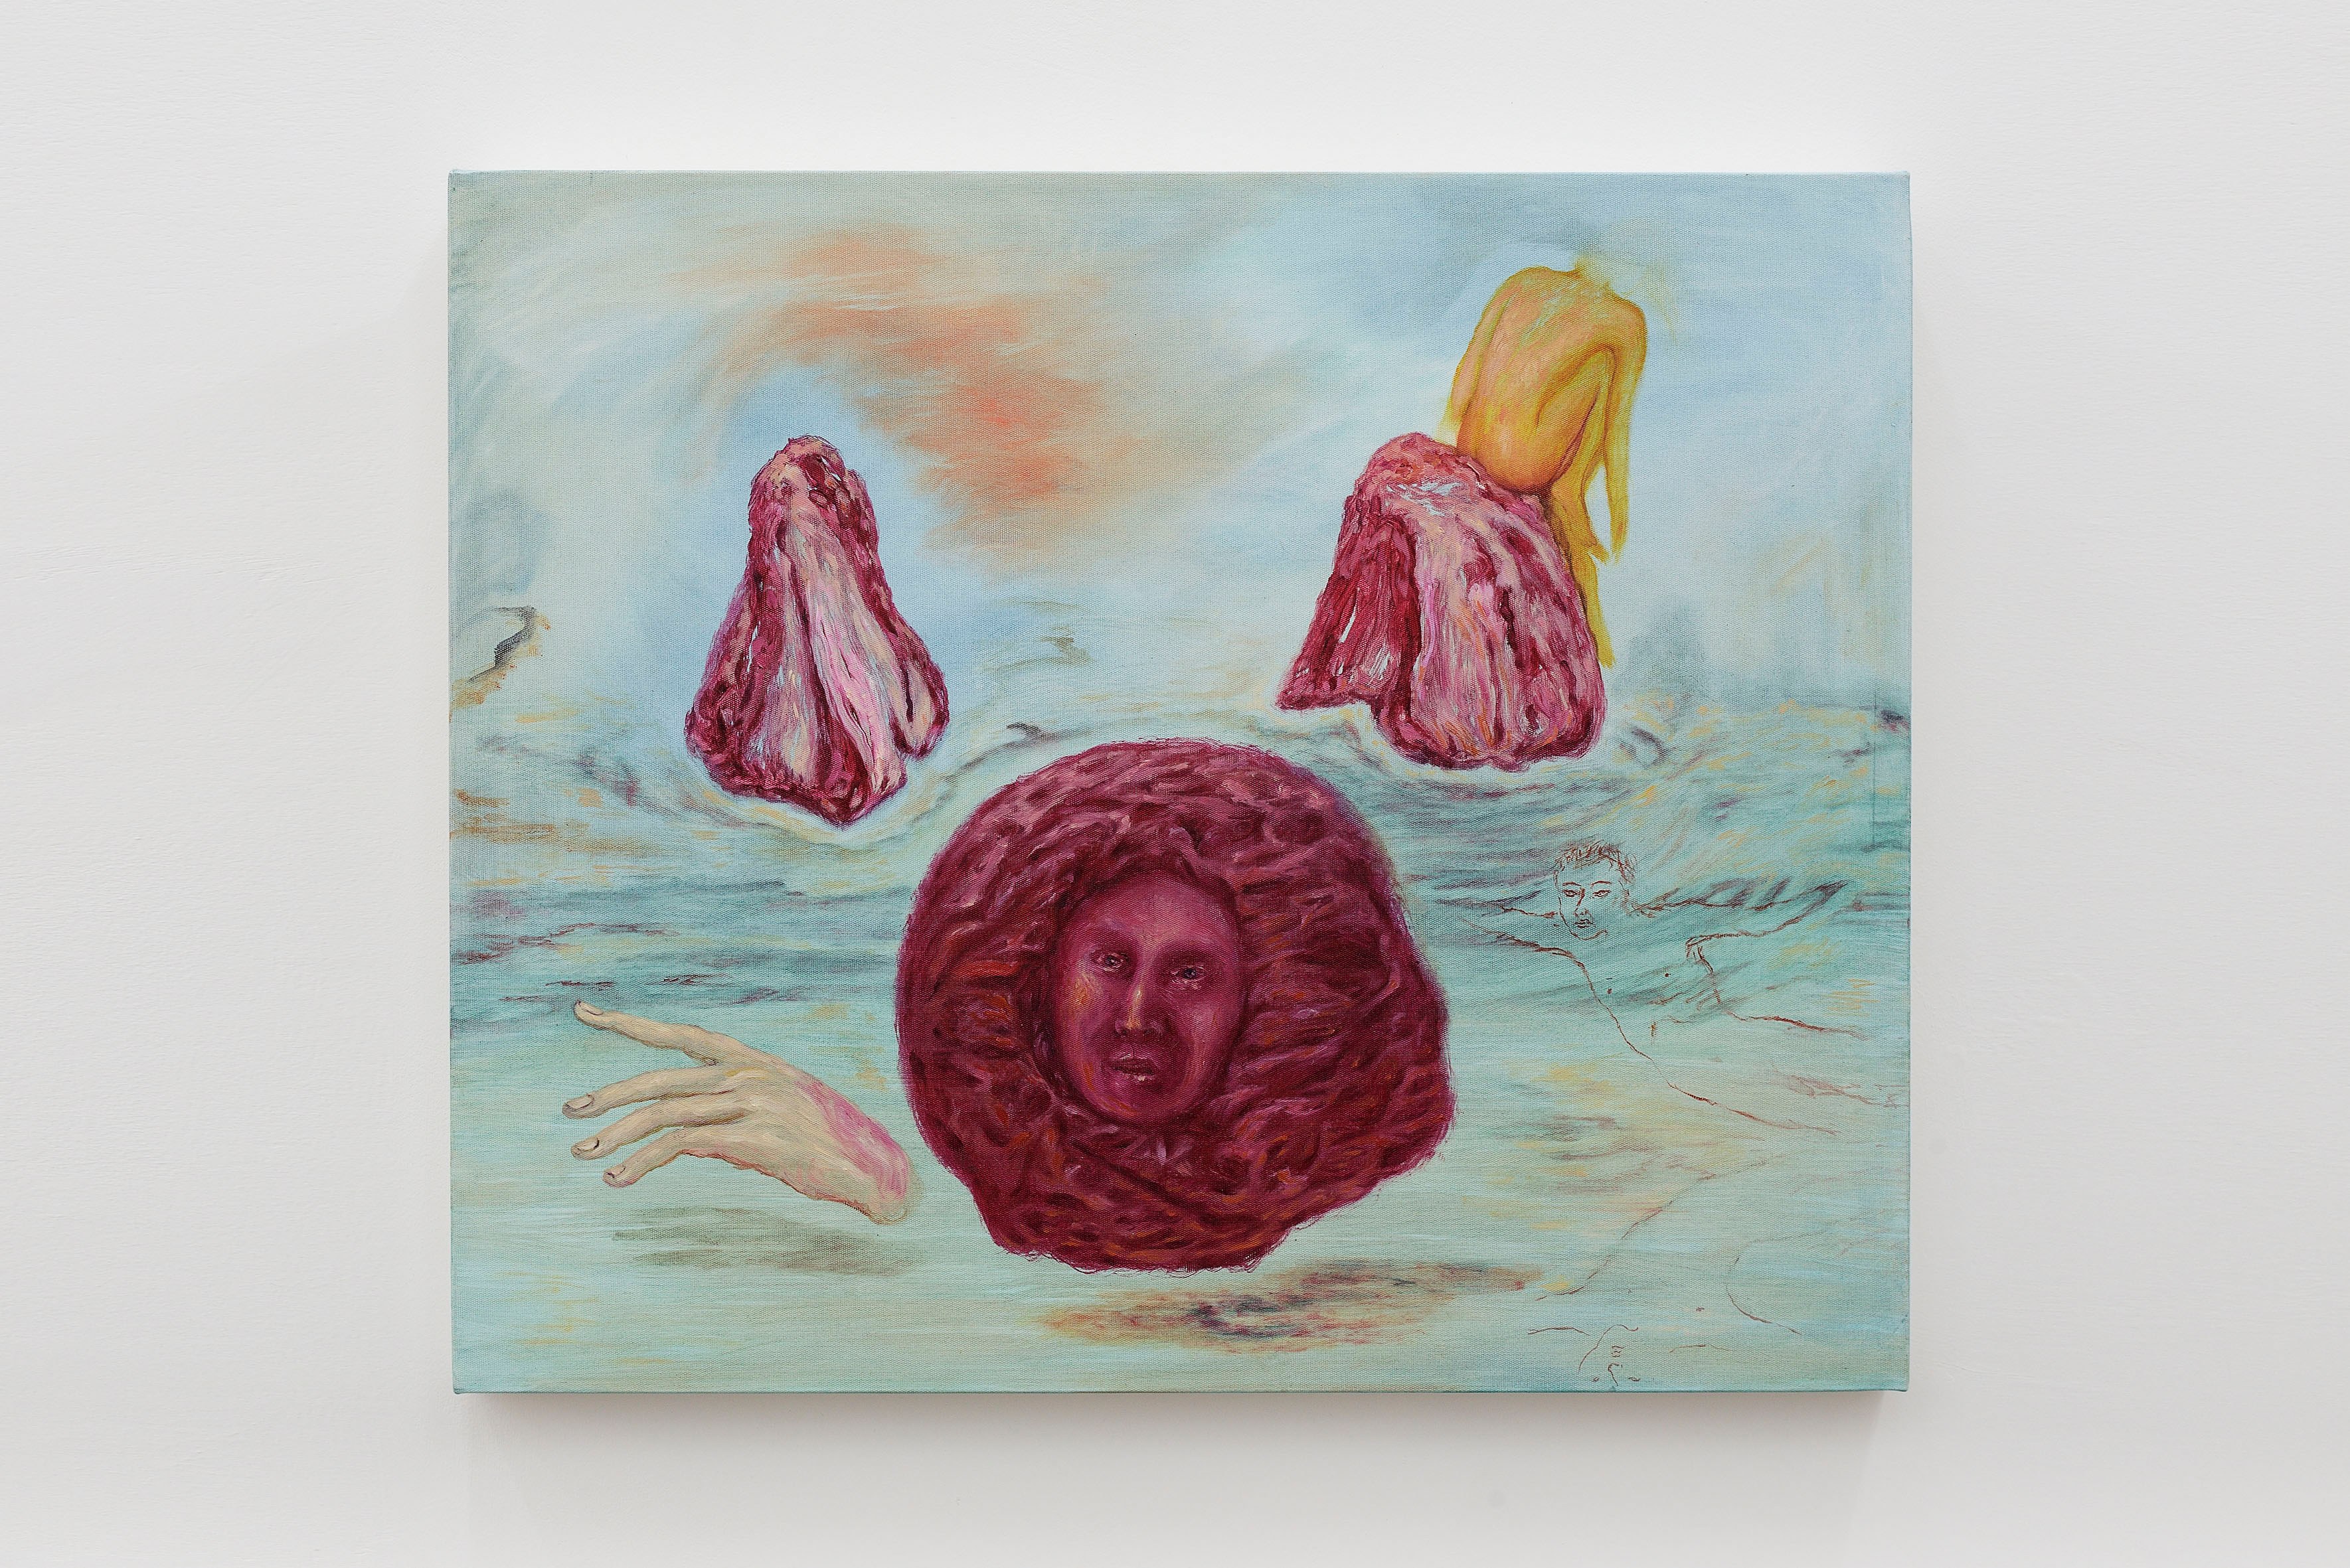 Francesca Banchelli, In the Back of my Mind, 2022/23, oil on canvas,  50 x 60 x 4 cm, courtesy of ADA, Rome